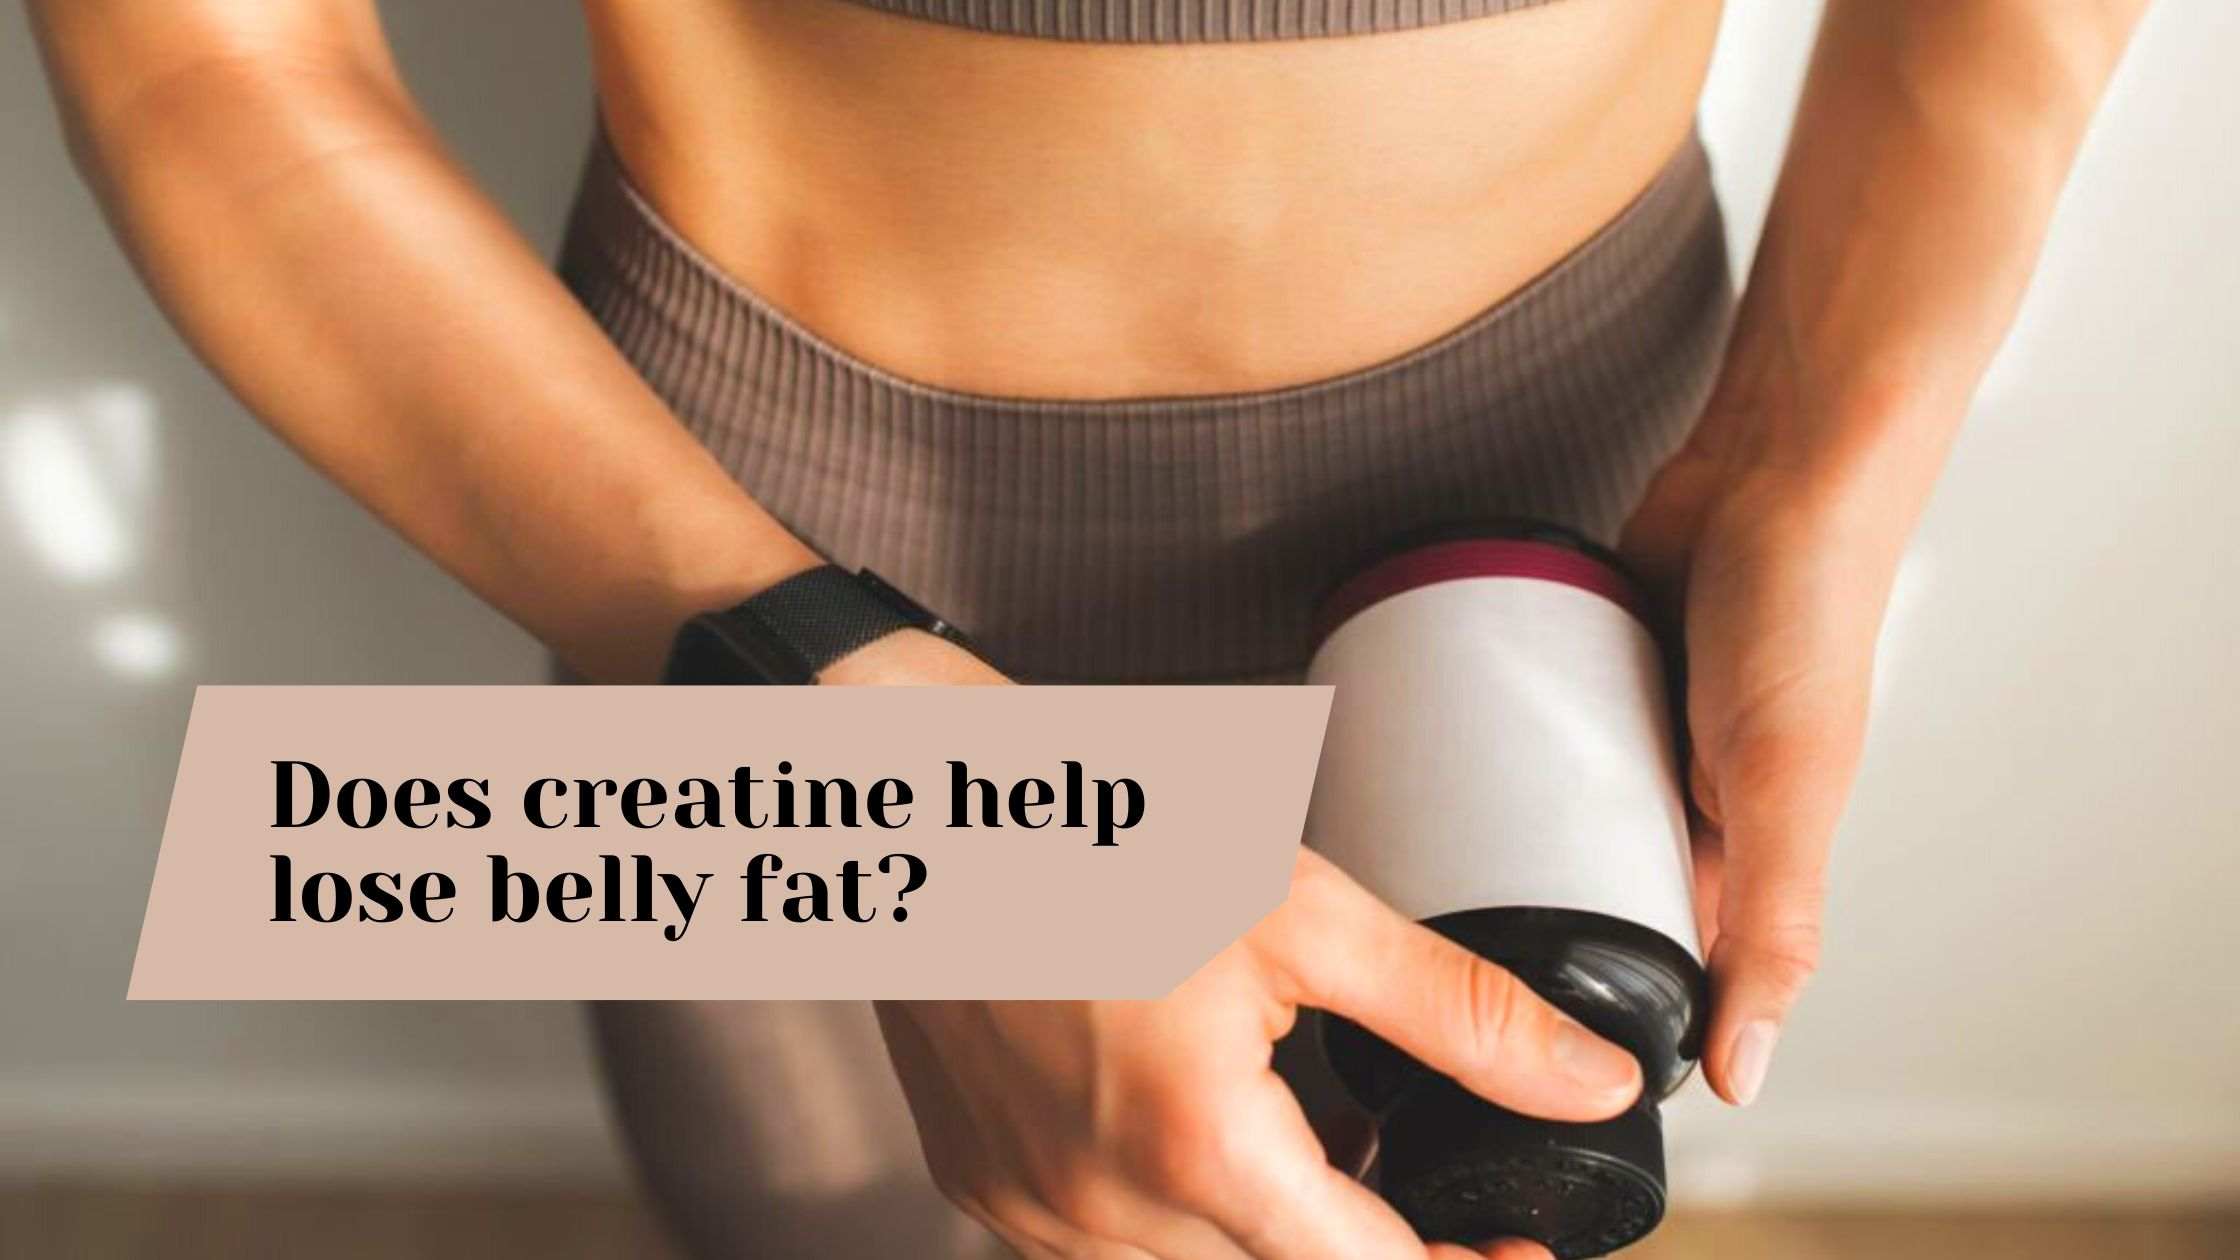 Should You Take Creatine While Trying To Lose Belly Fat